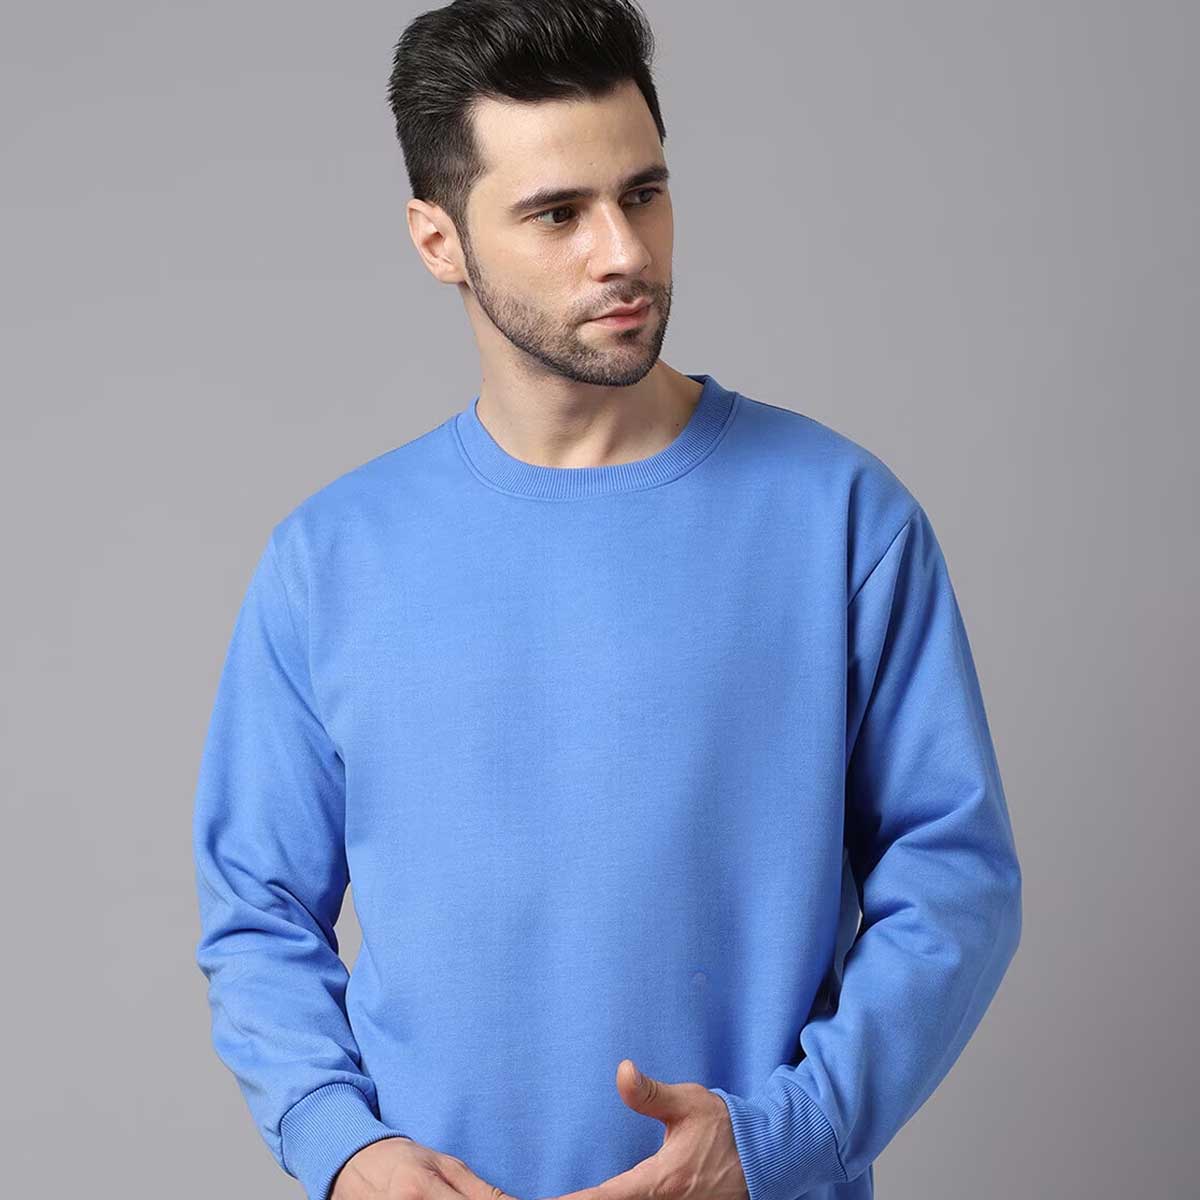 Promotional Sweatshirts Manufacturers in Astrakhan